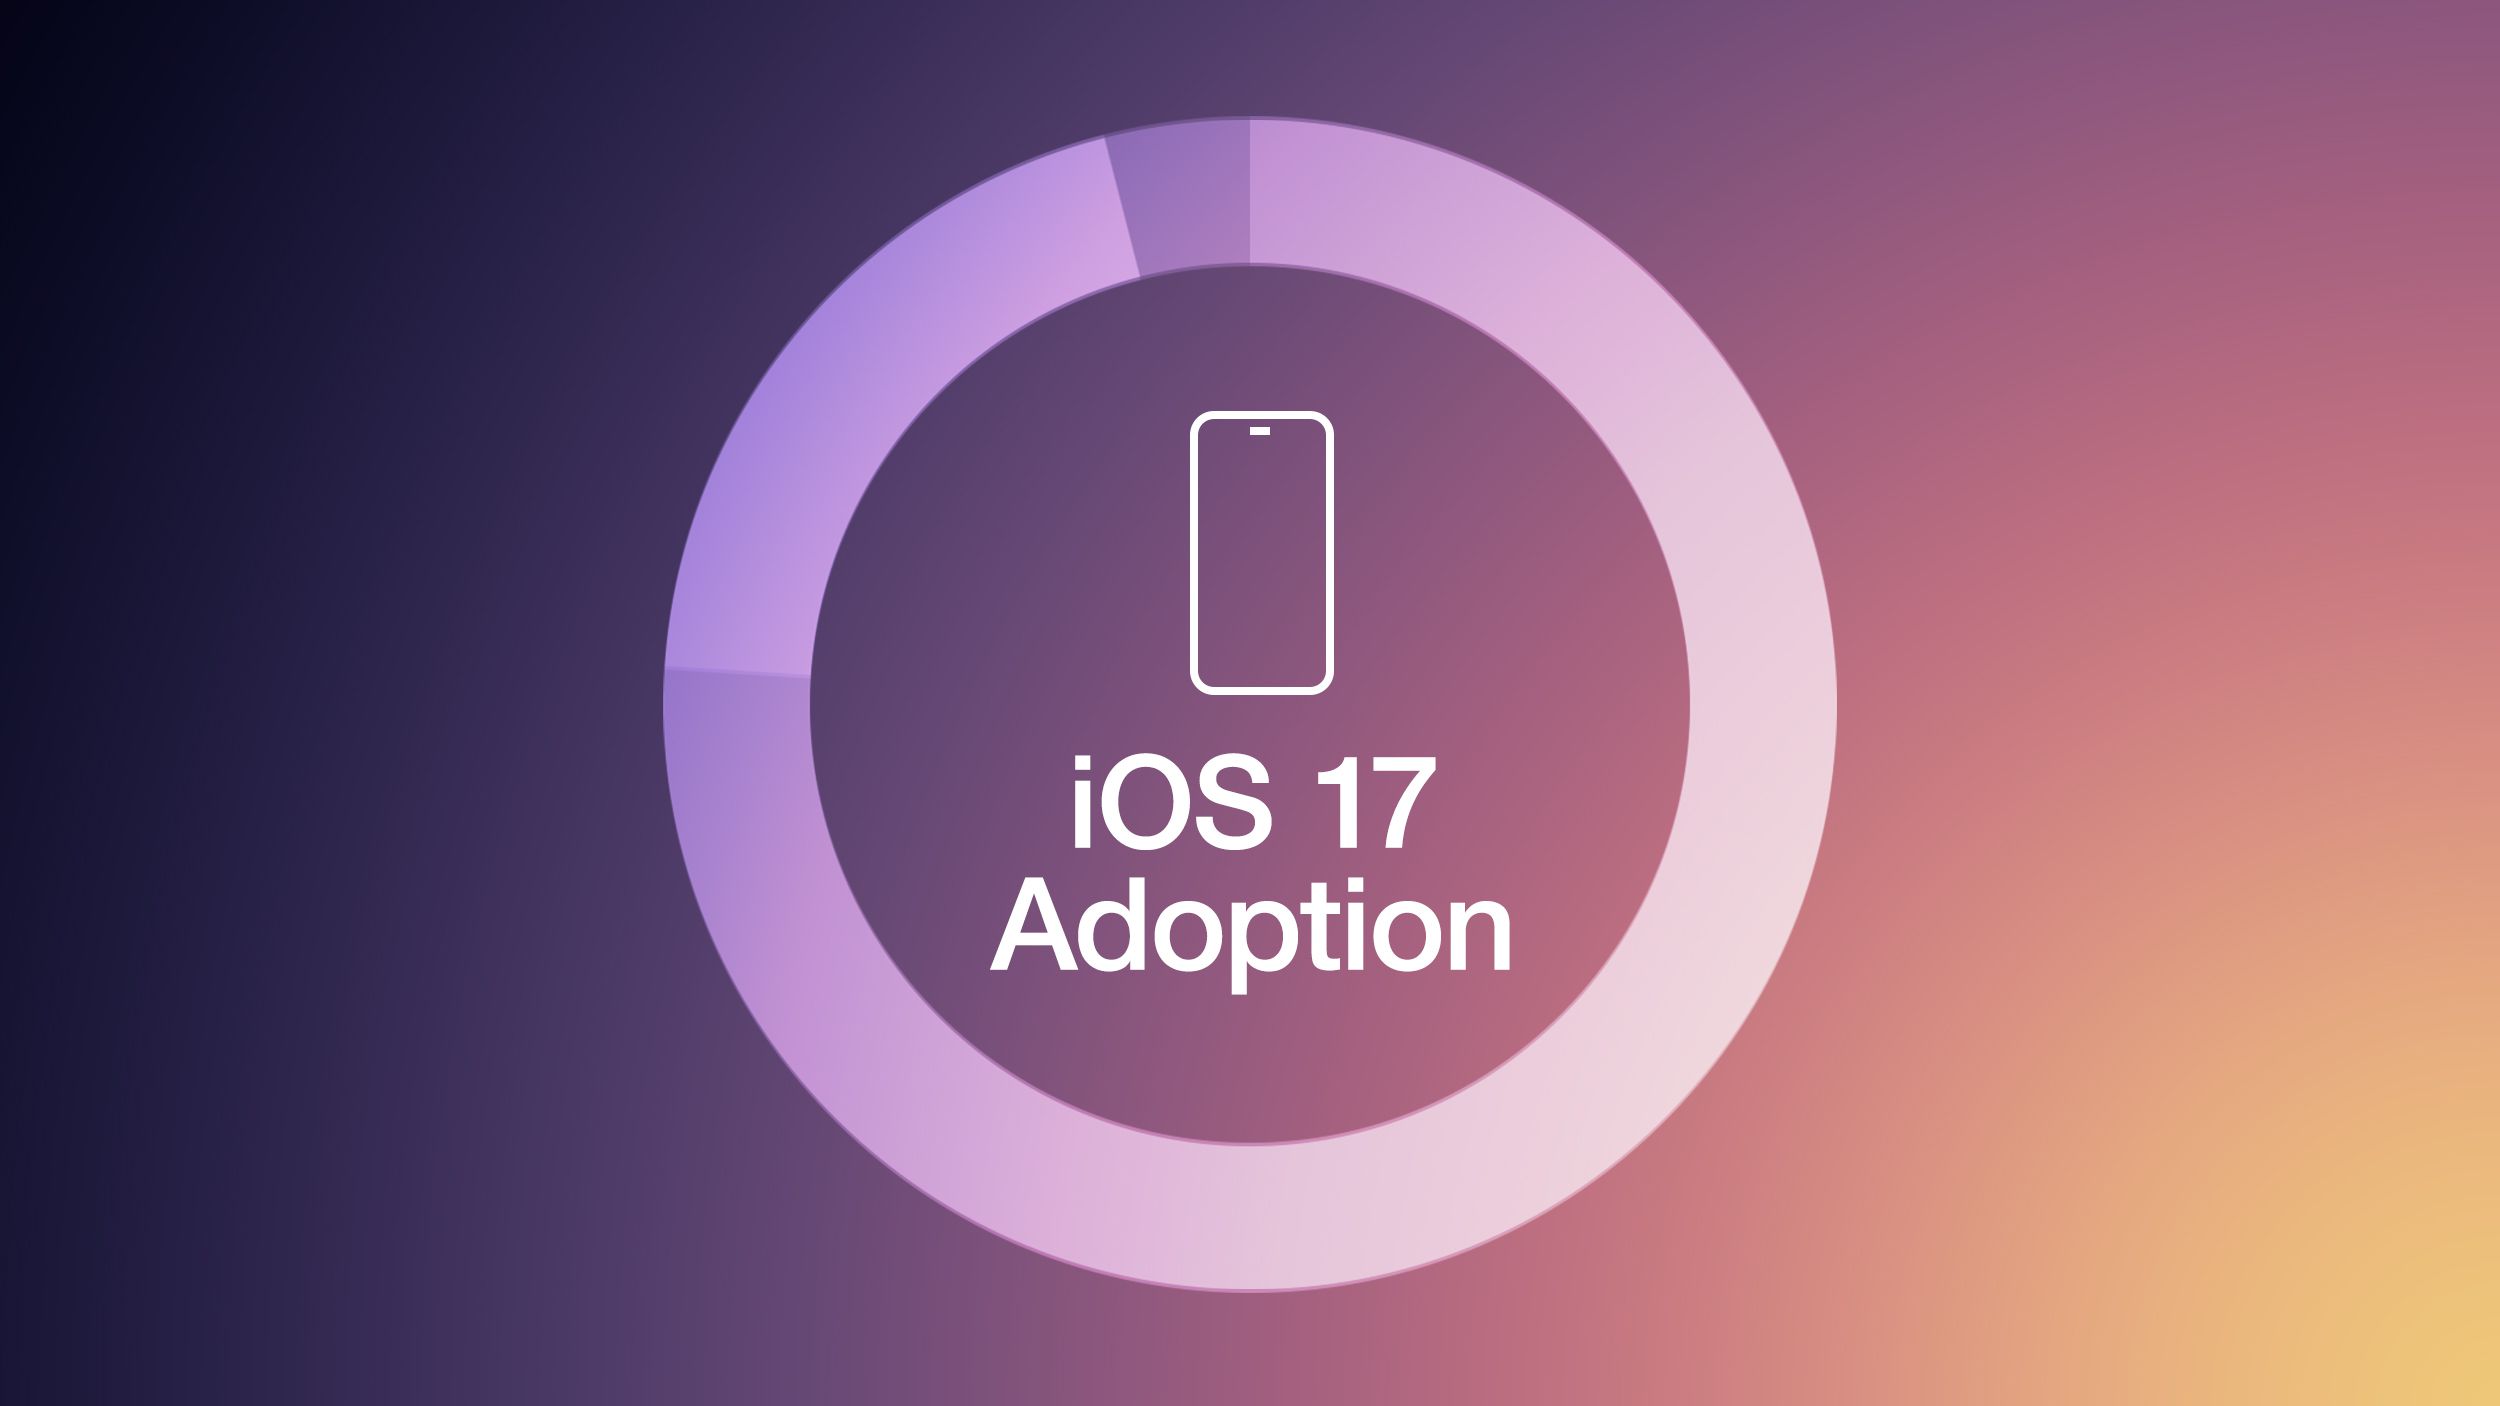 iOS Users Display Reluctance in Upgrading to iOS 17 Compared to iOS 16